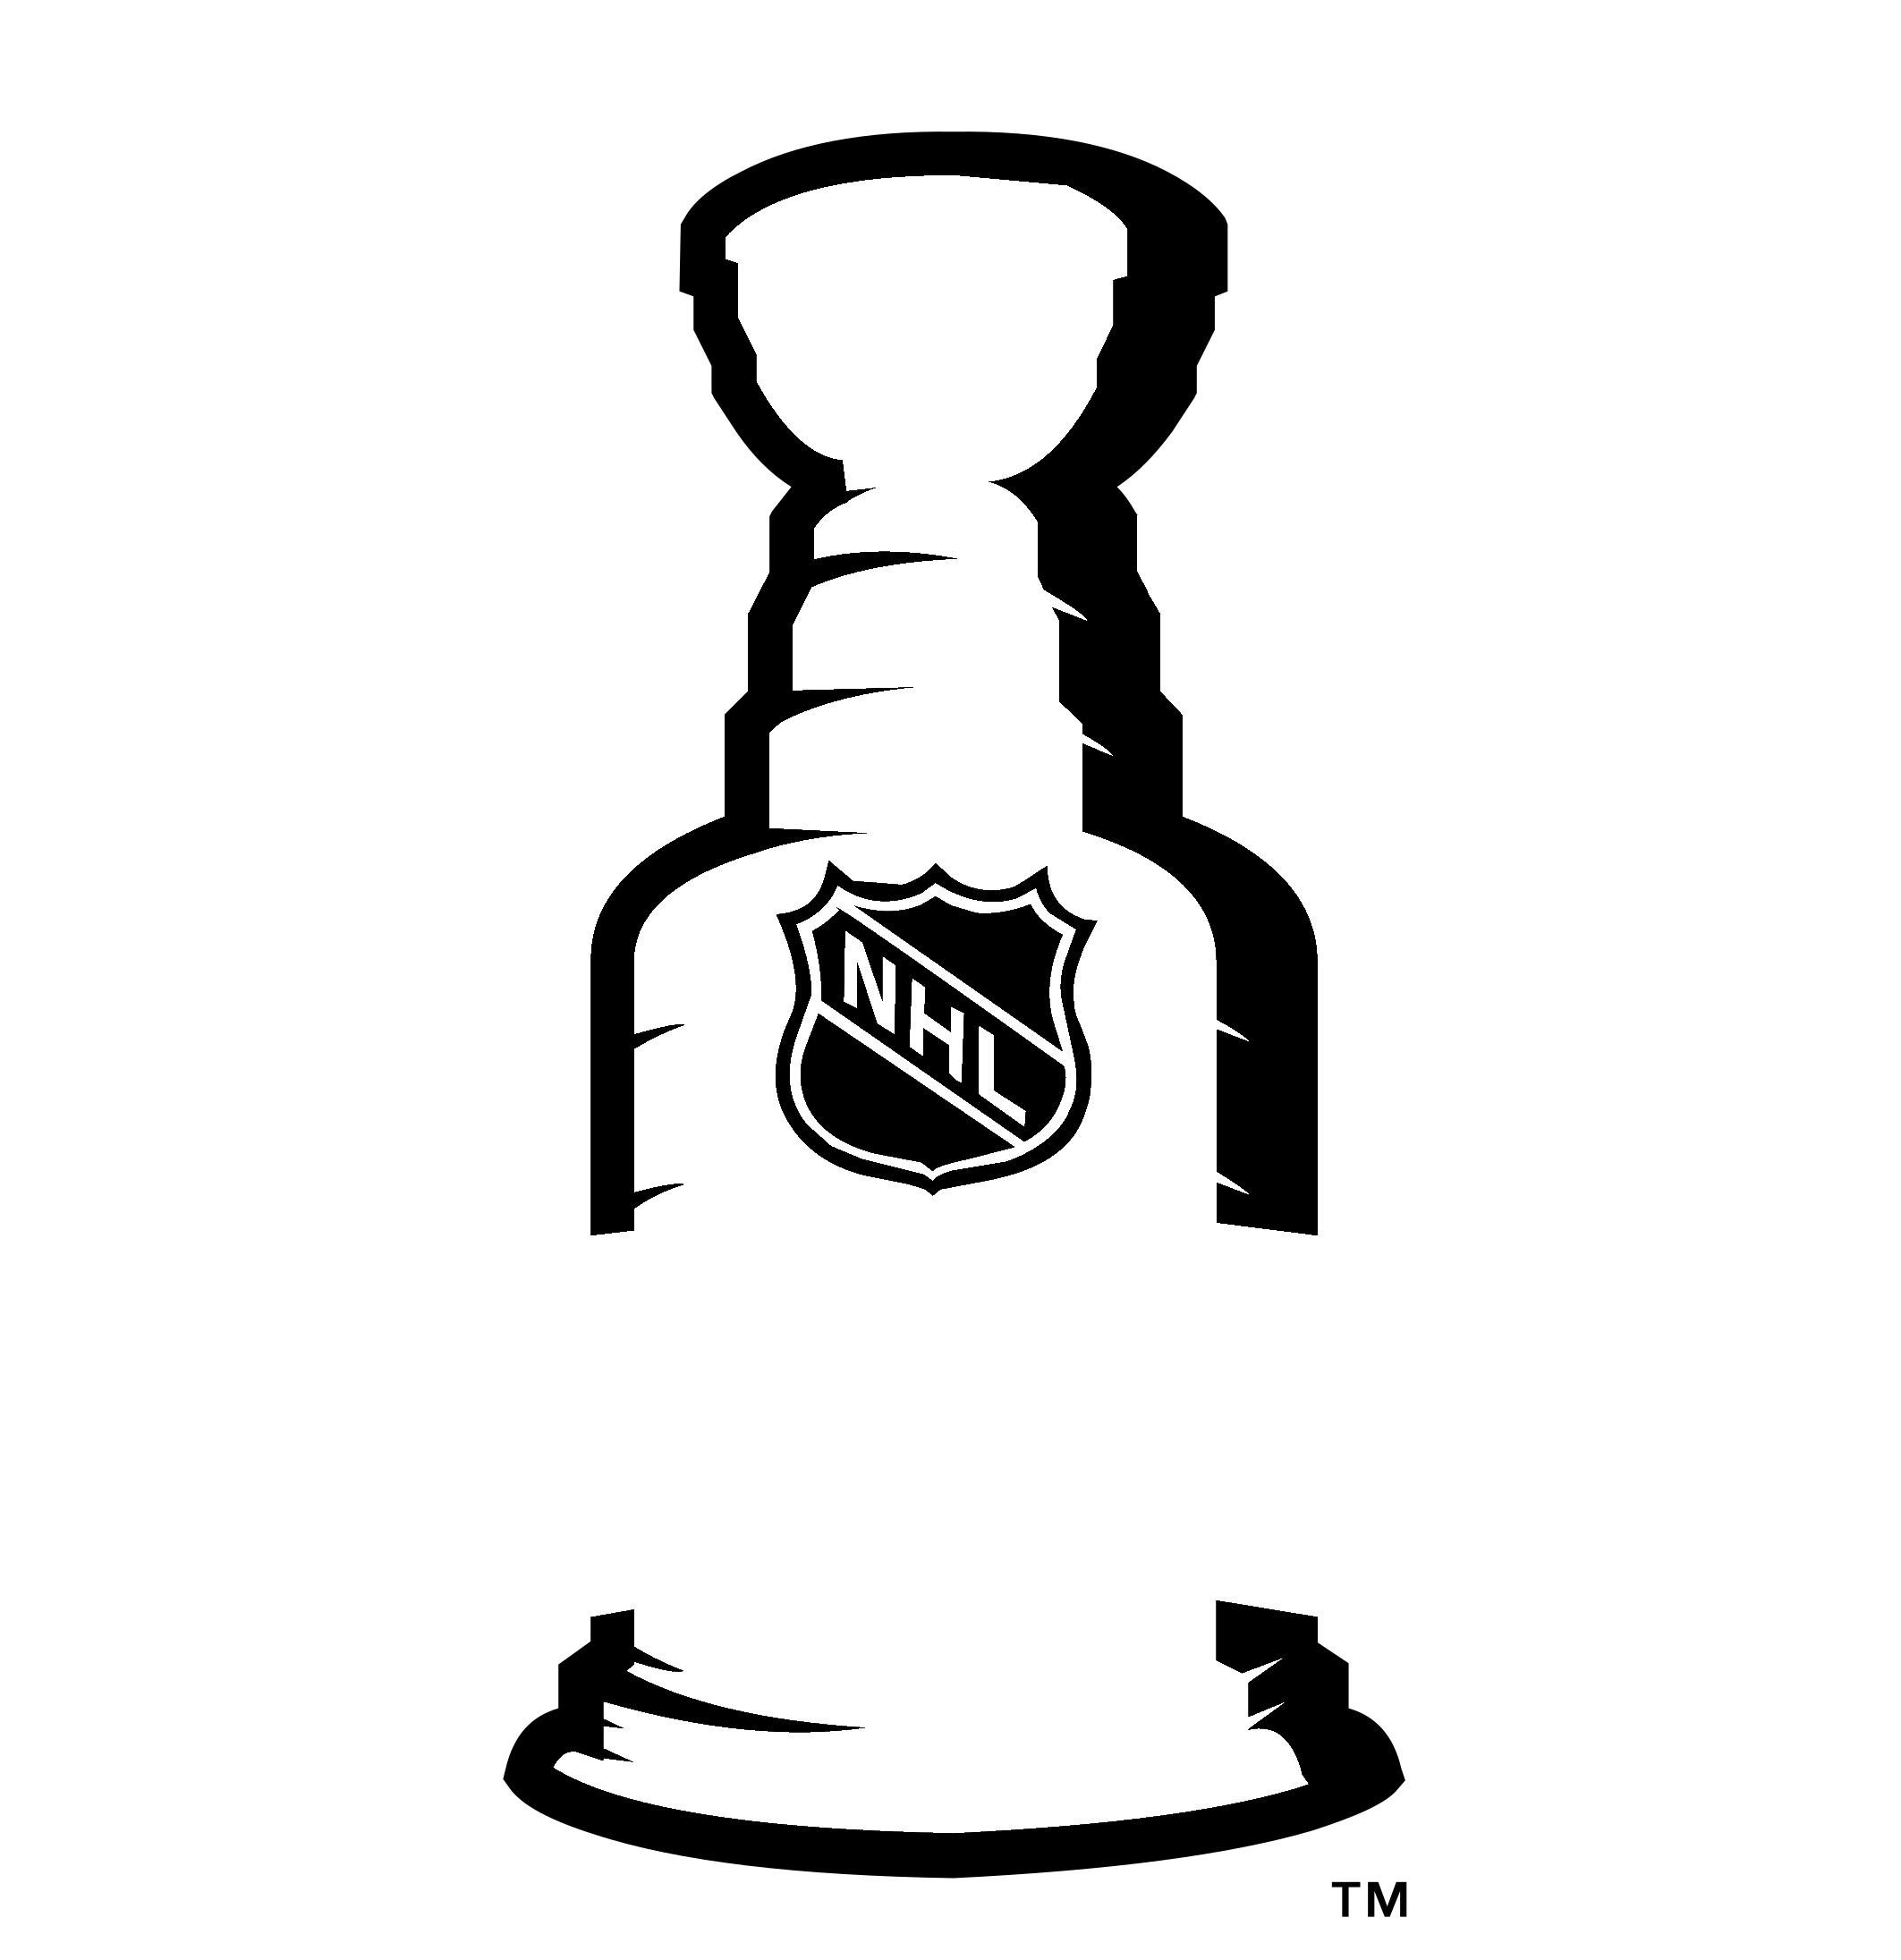 Stanley Cup 1996 Logo Black And White - Stanley Cup Black And White (2400x2400)